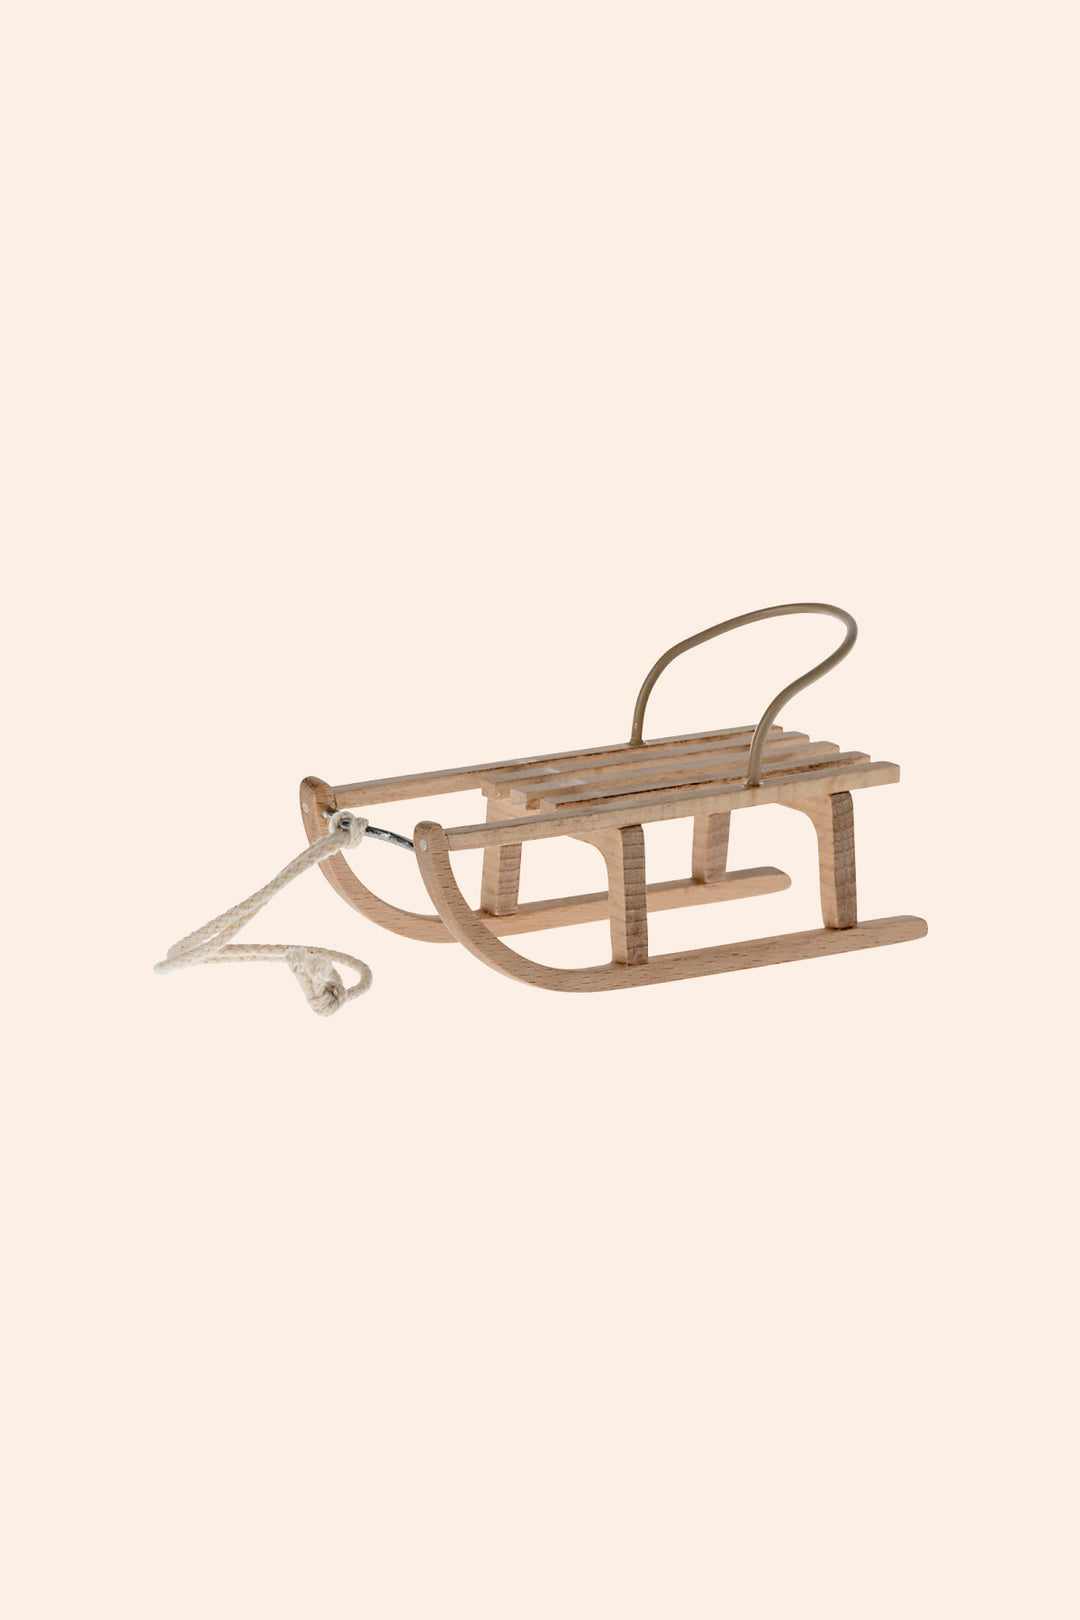 Maileg Wooden Sled Mouse